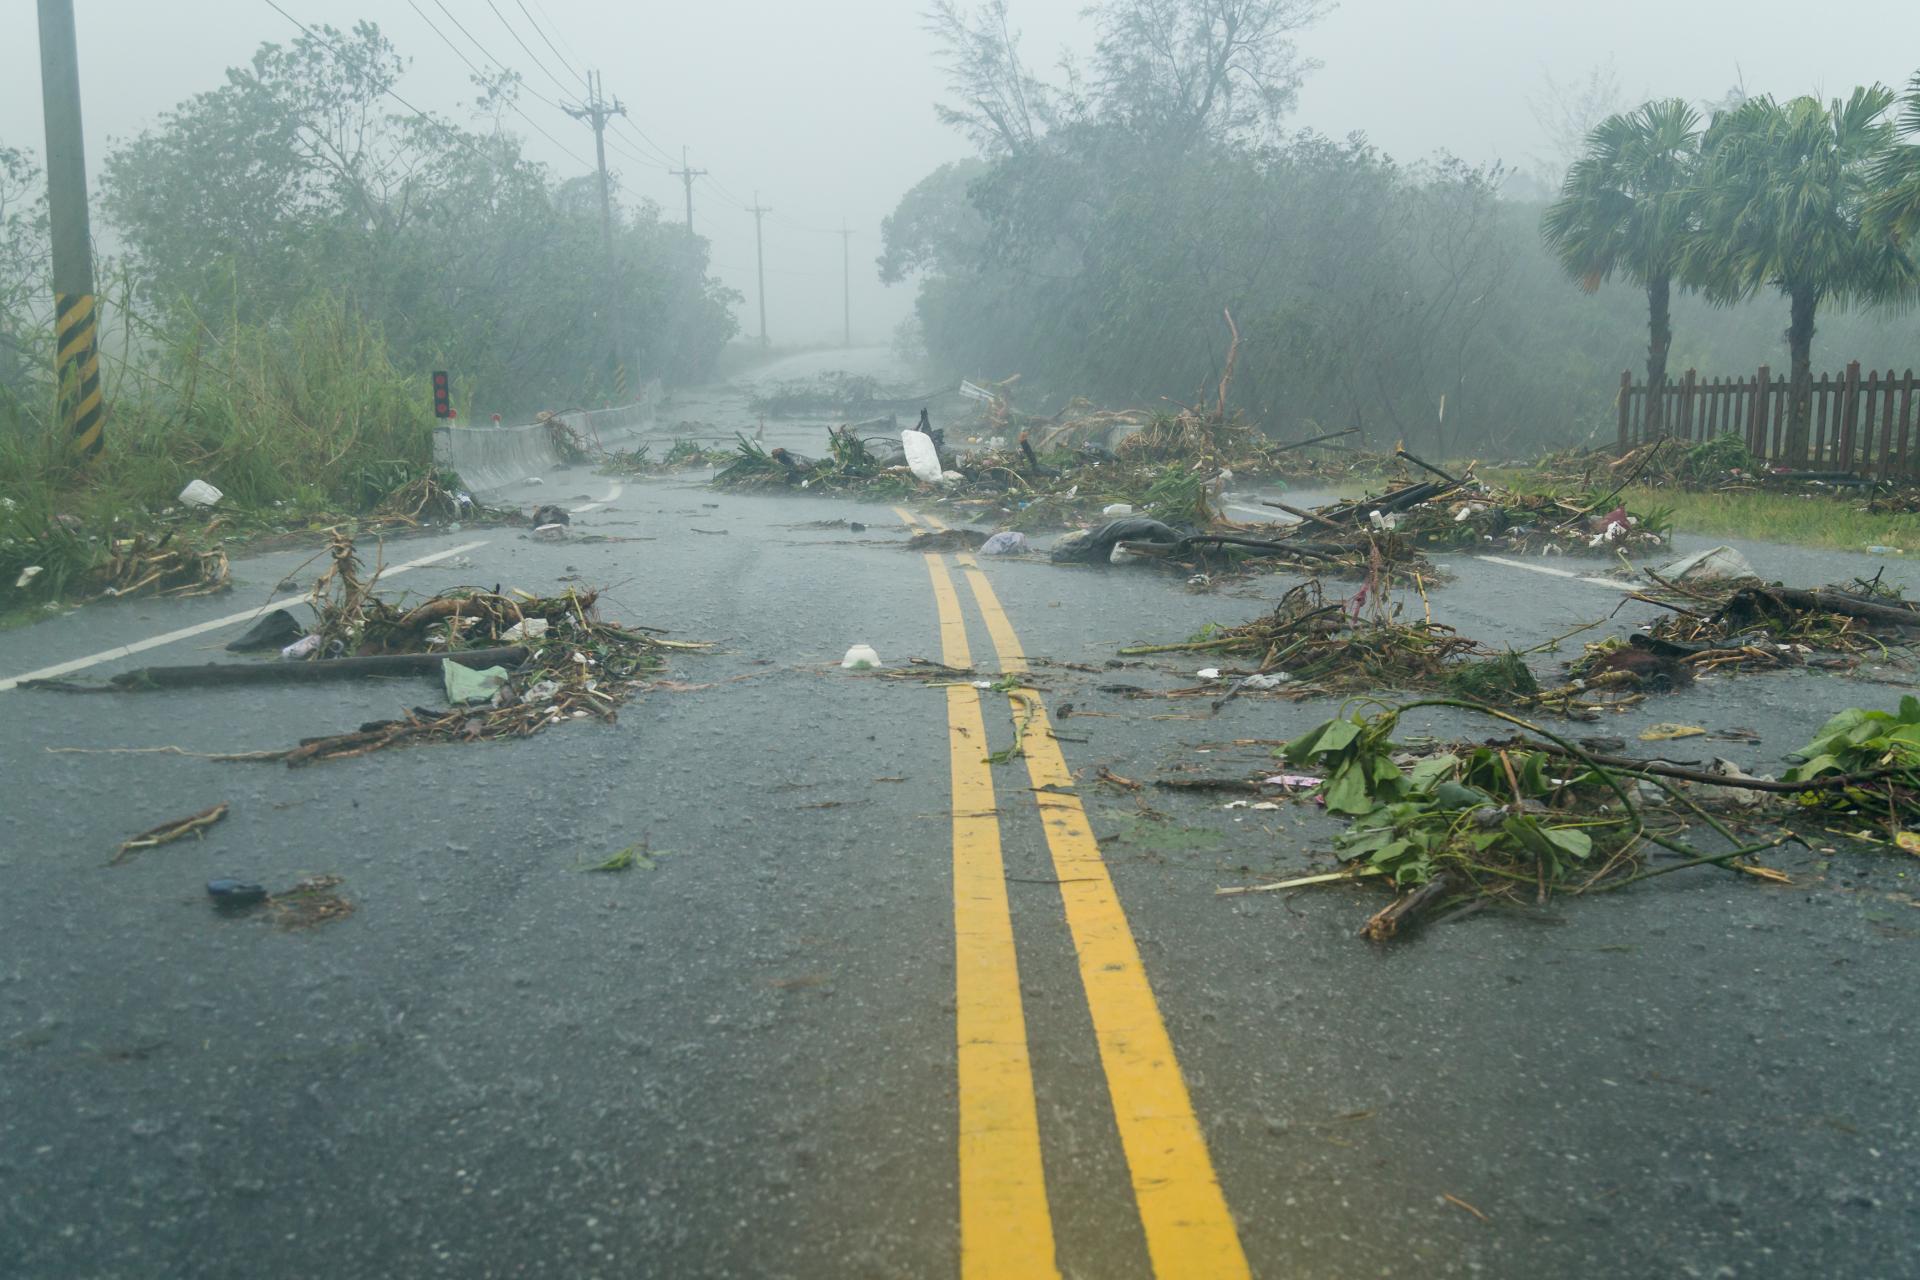 Debris on the road after a hurricane 